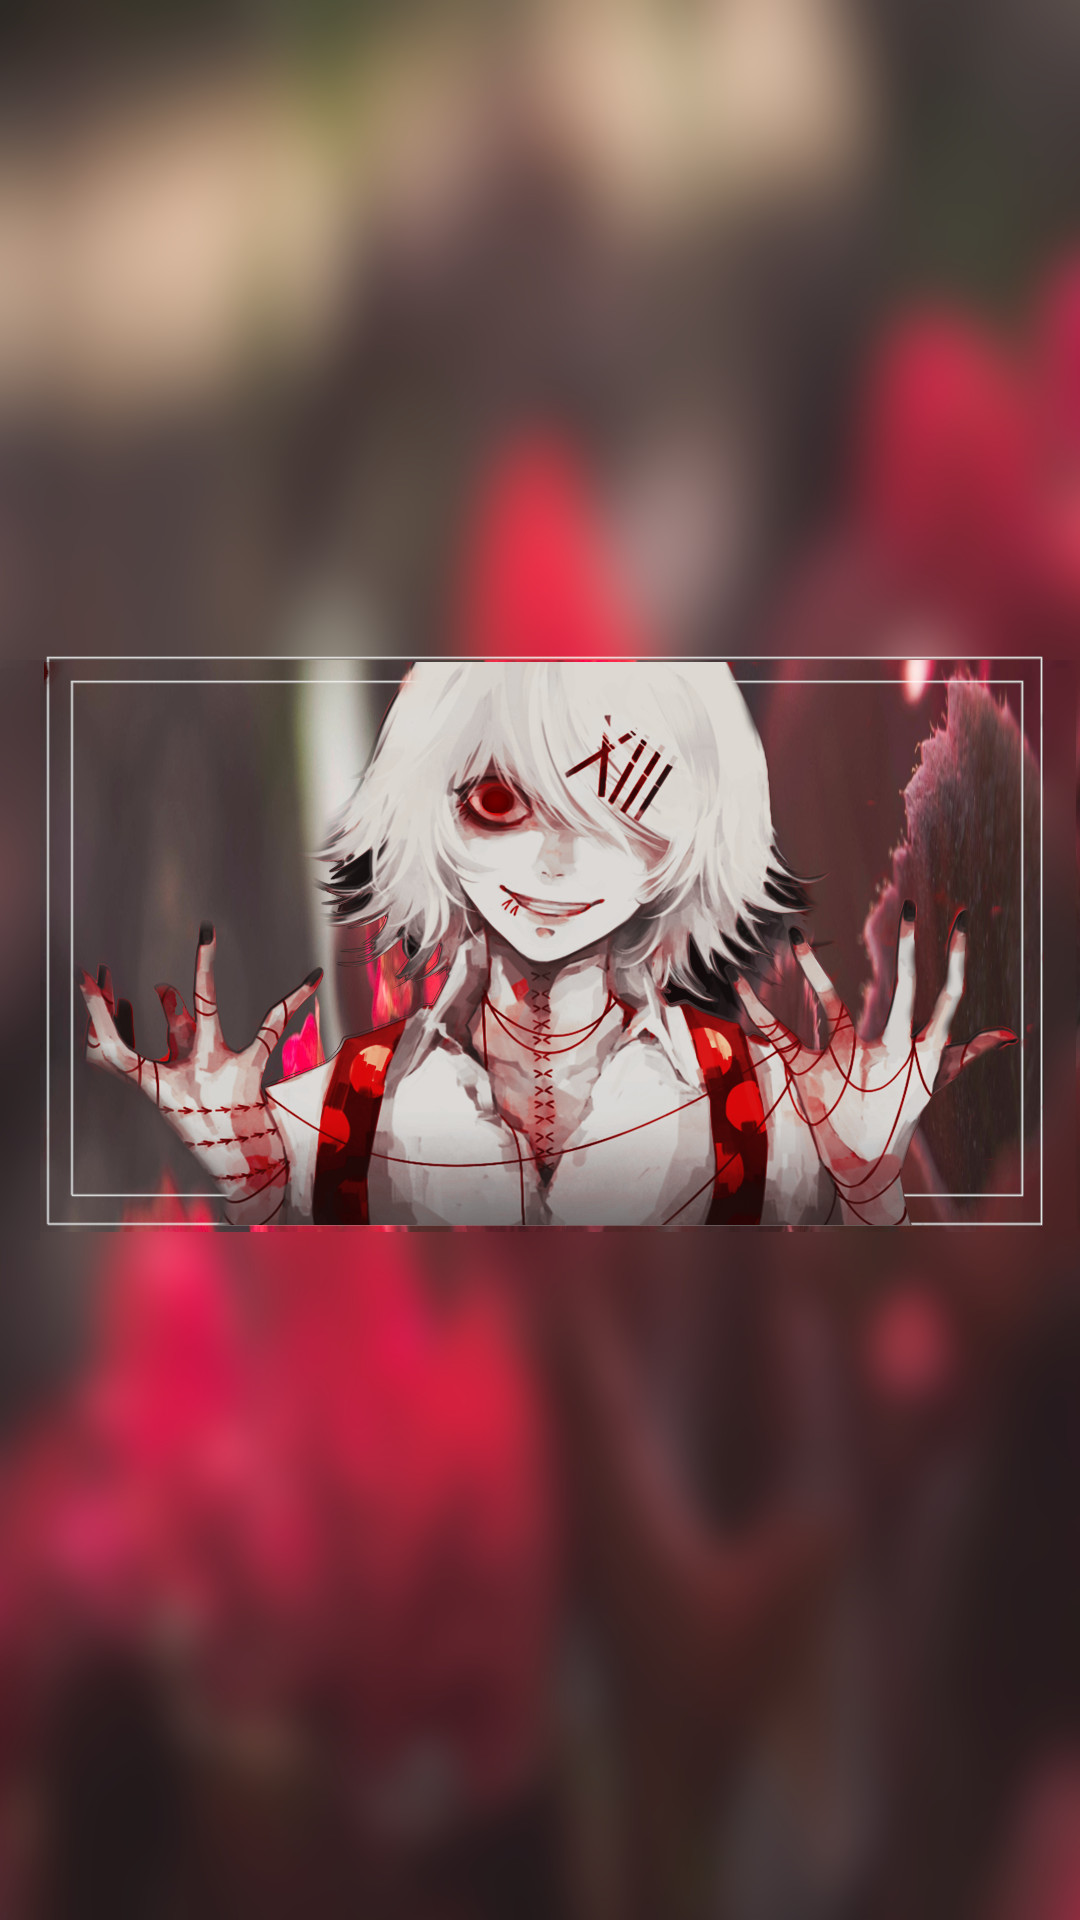 Anime 1080x1920 Suzuya Juuzou Tokyo Ghoul anime picture-in-picture frontal view